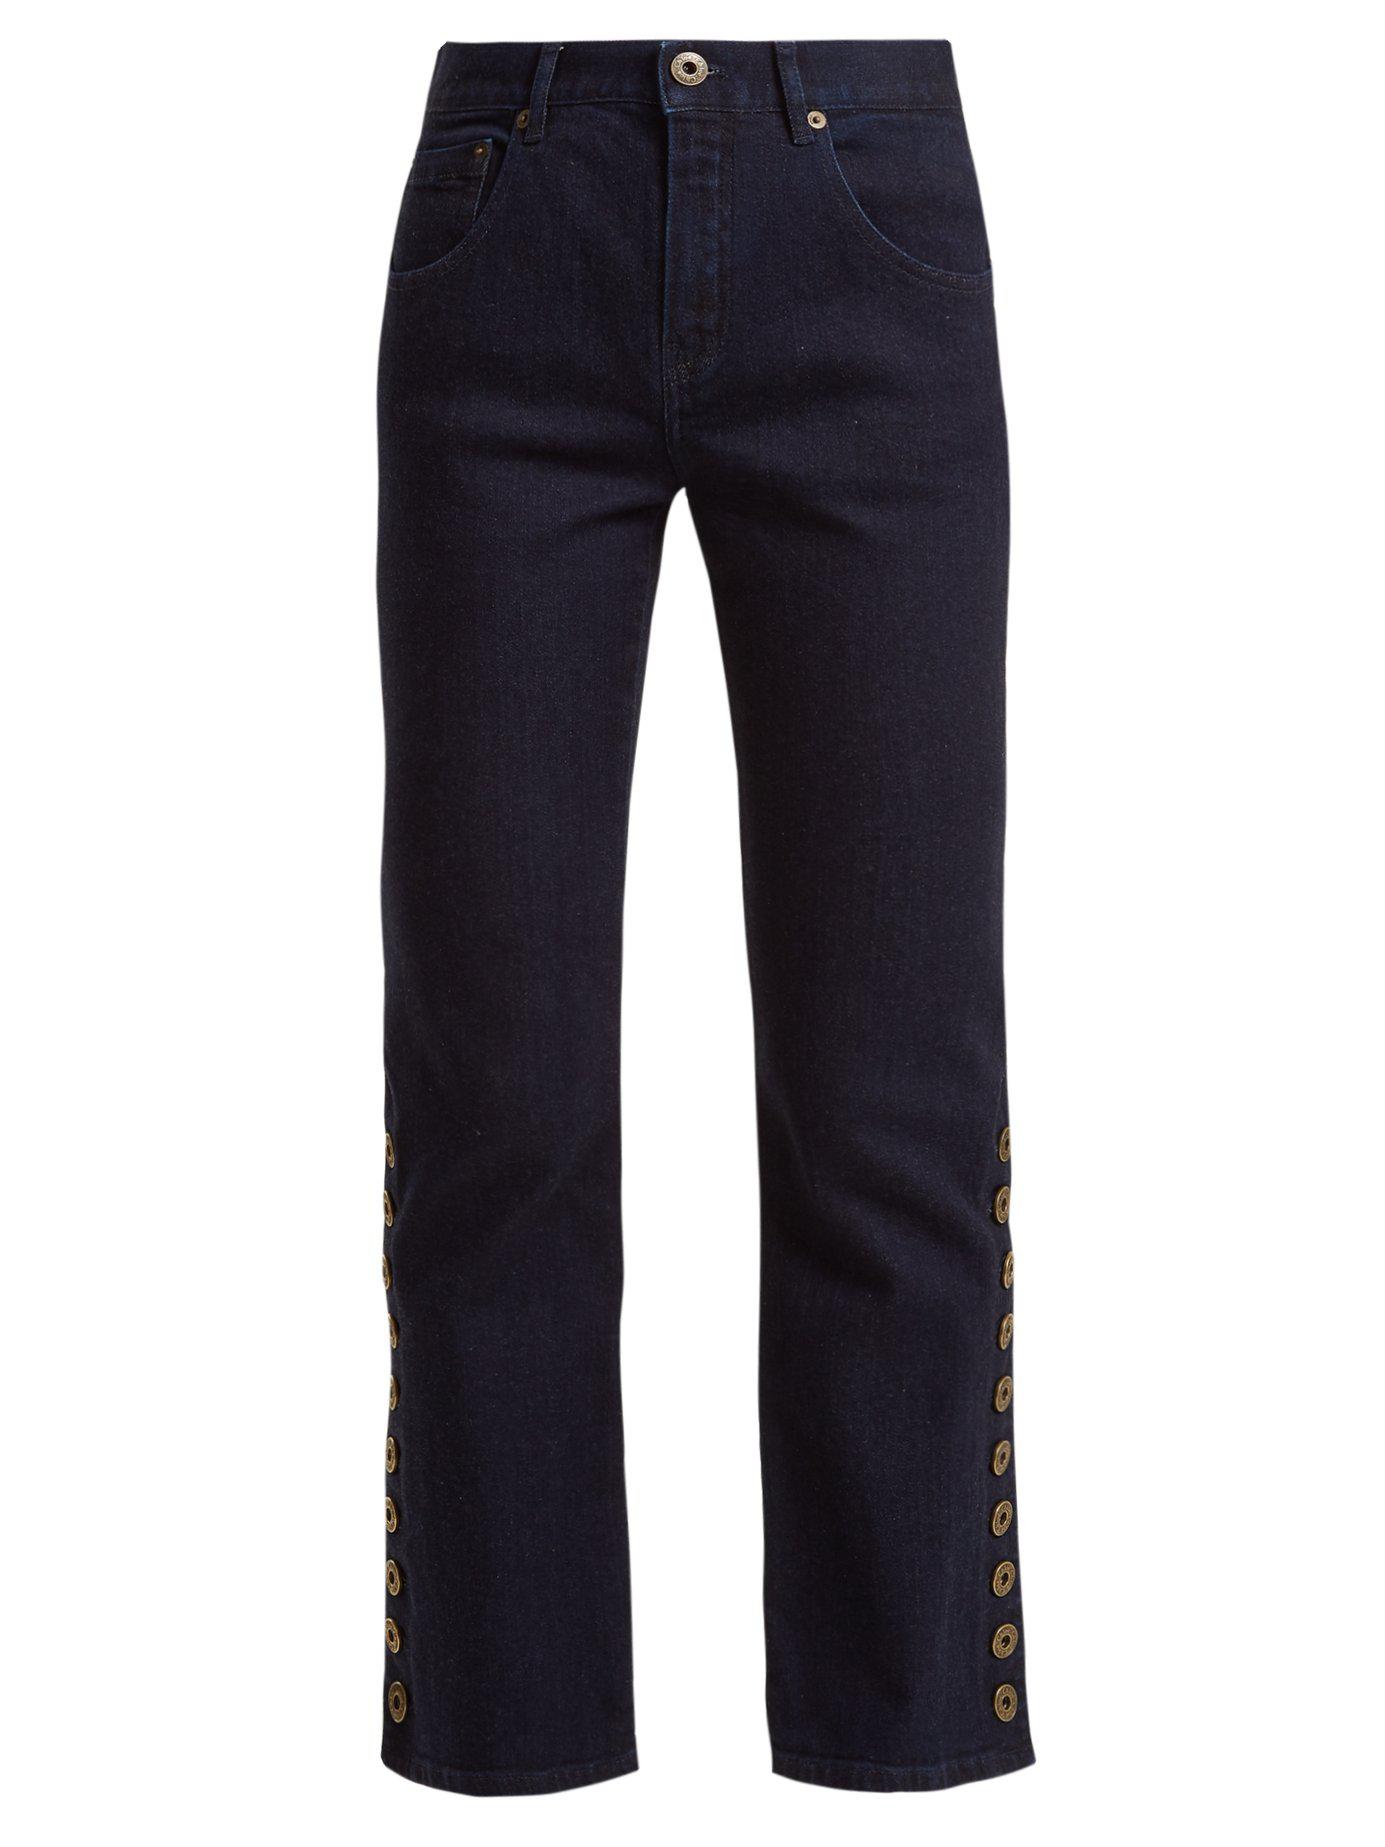 Chloé Mid-rise Kick-flare Cropped Jeans in Blue - Lyst